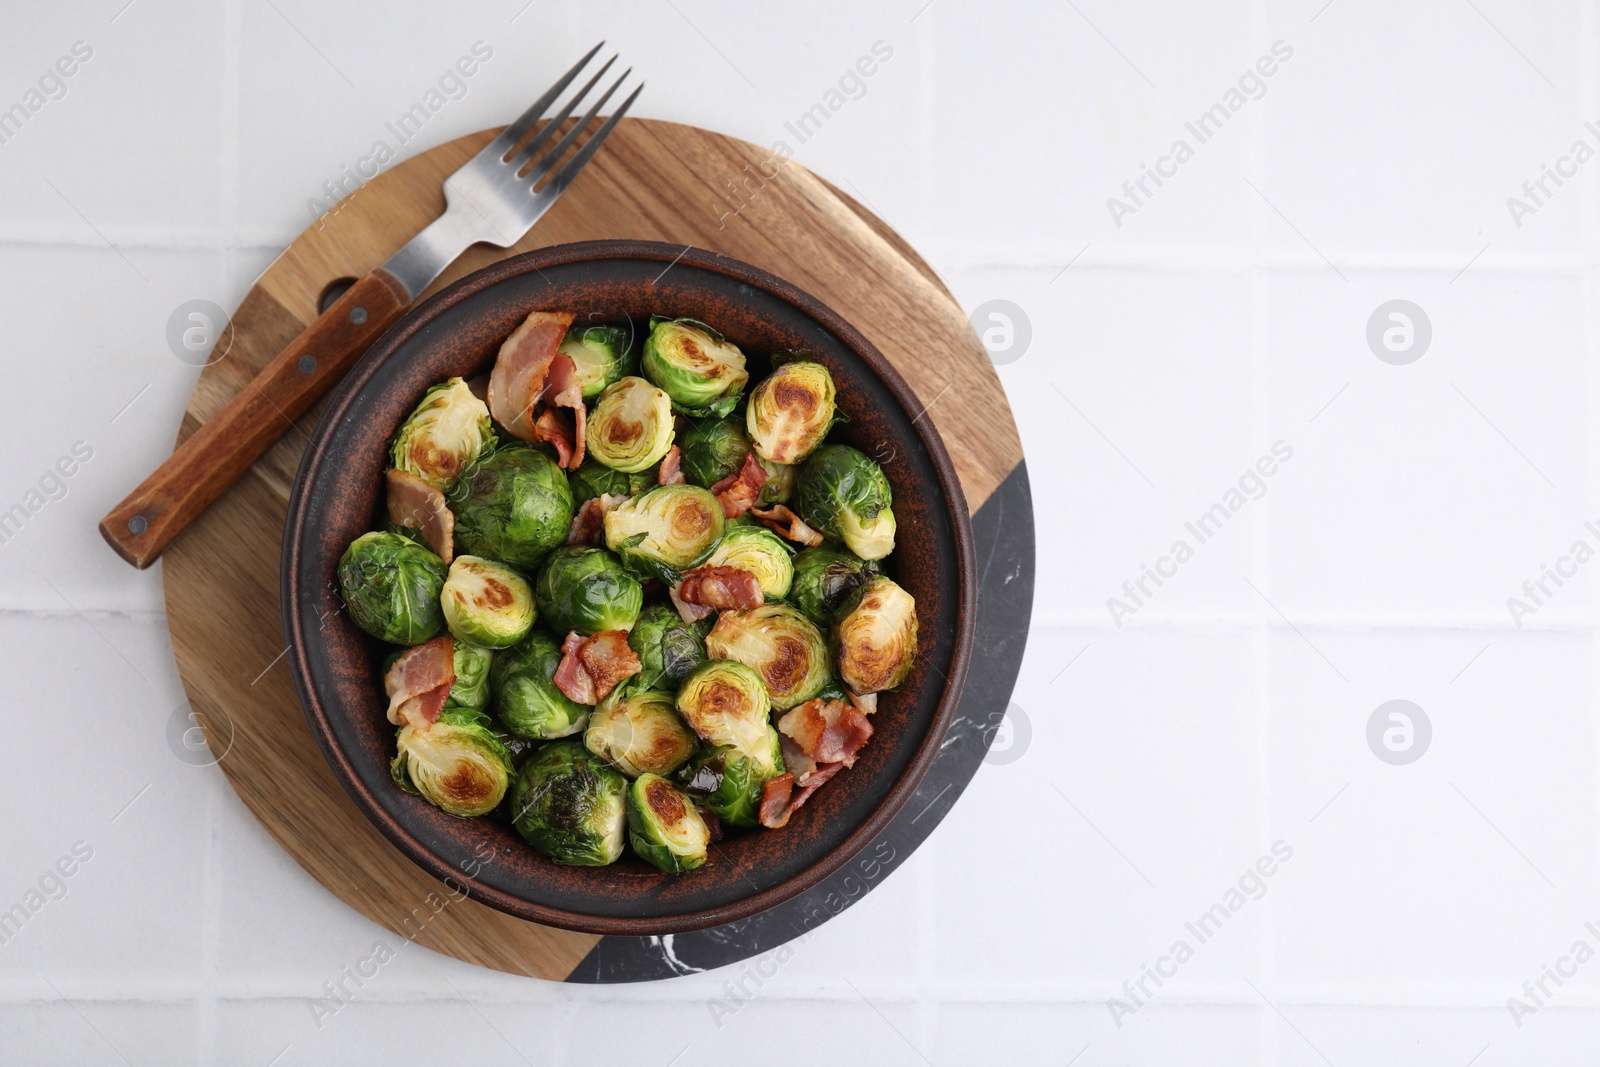 Photo of Delicious roasted Brussels sprouts and bacon in bowl on white tiled table, top view. Space for text